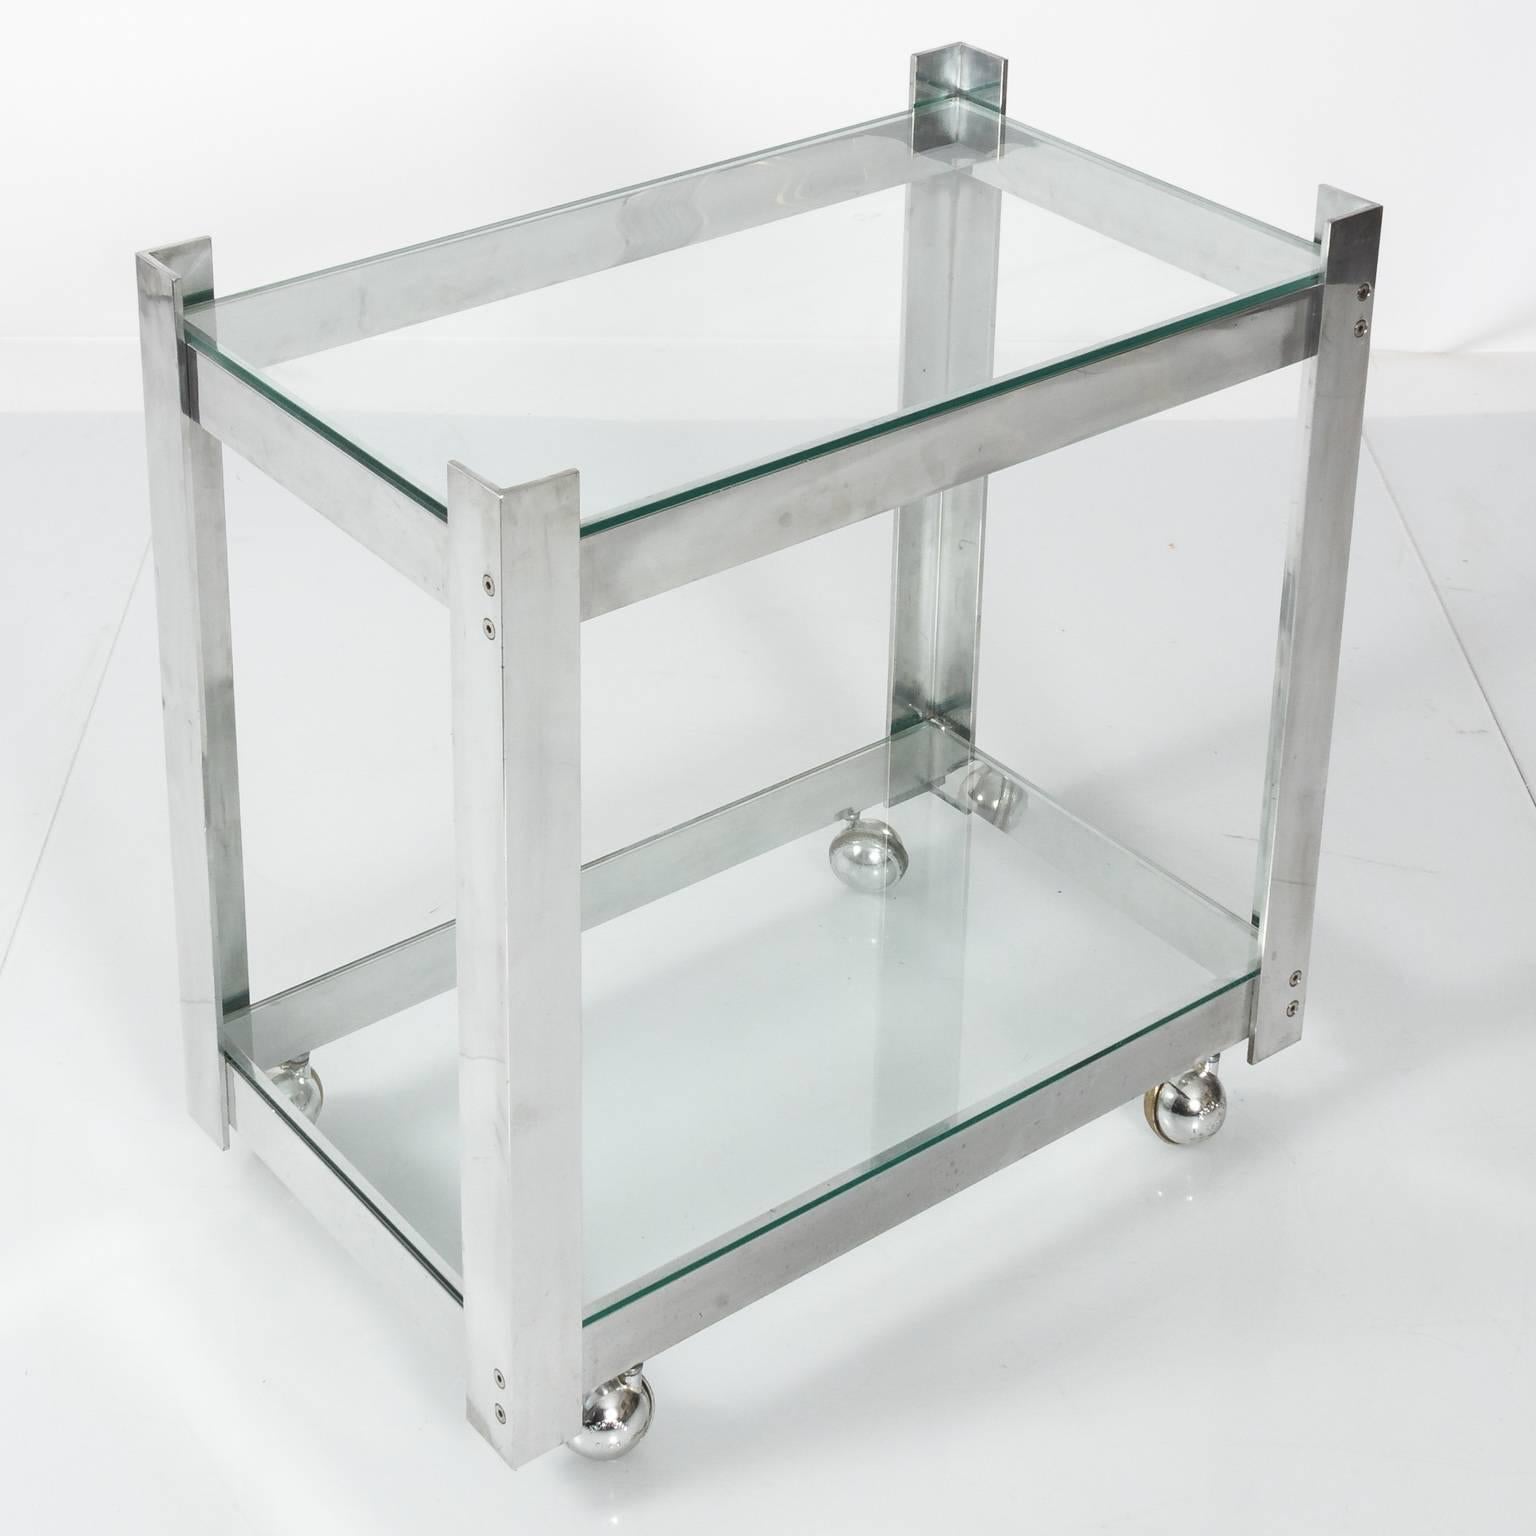 Two-tiered aluminum bar cart with glass shelves on wheels in a polished finish.
 